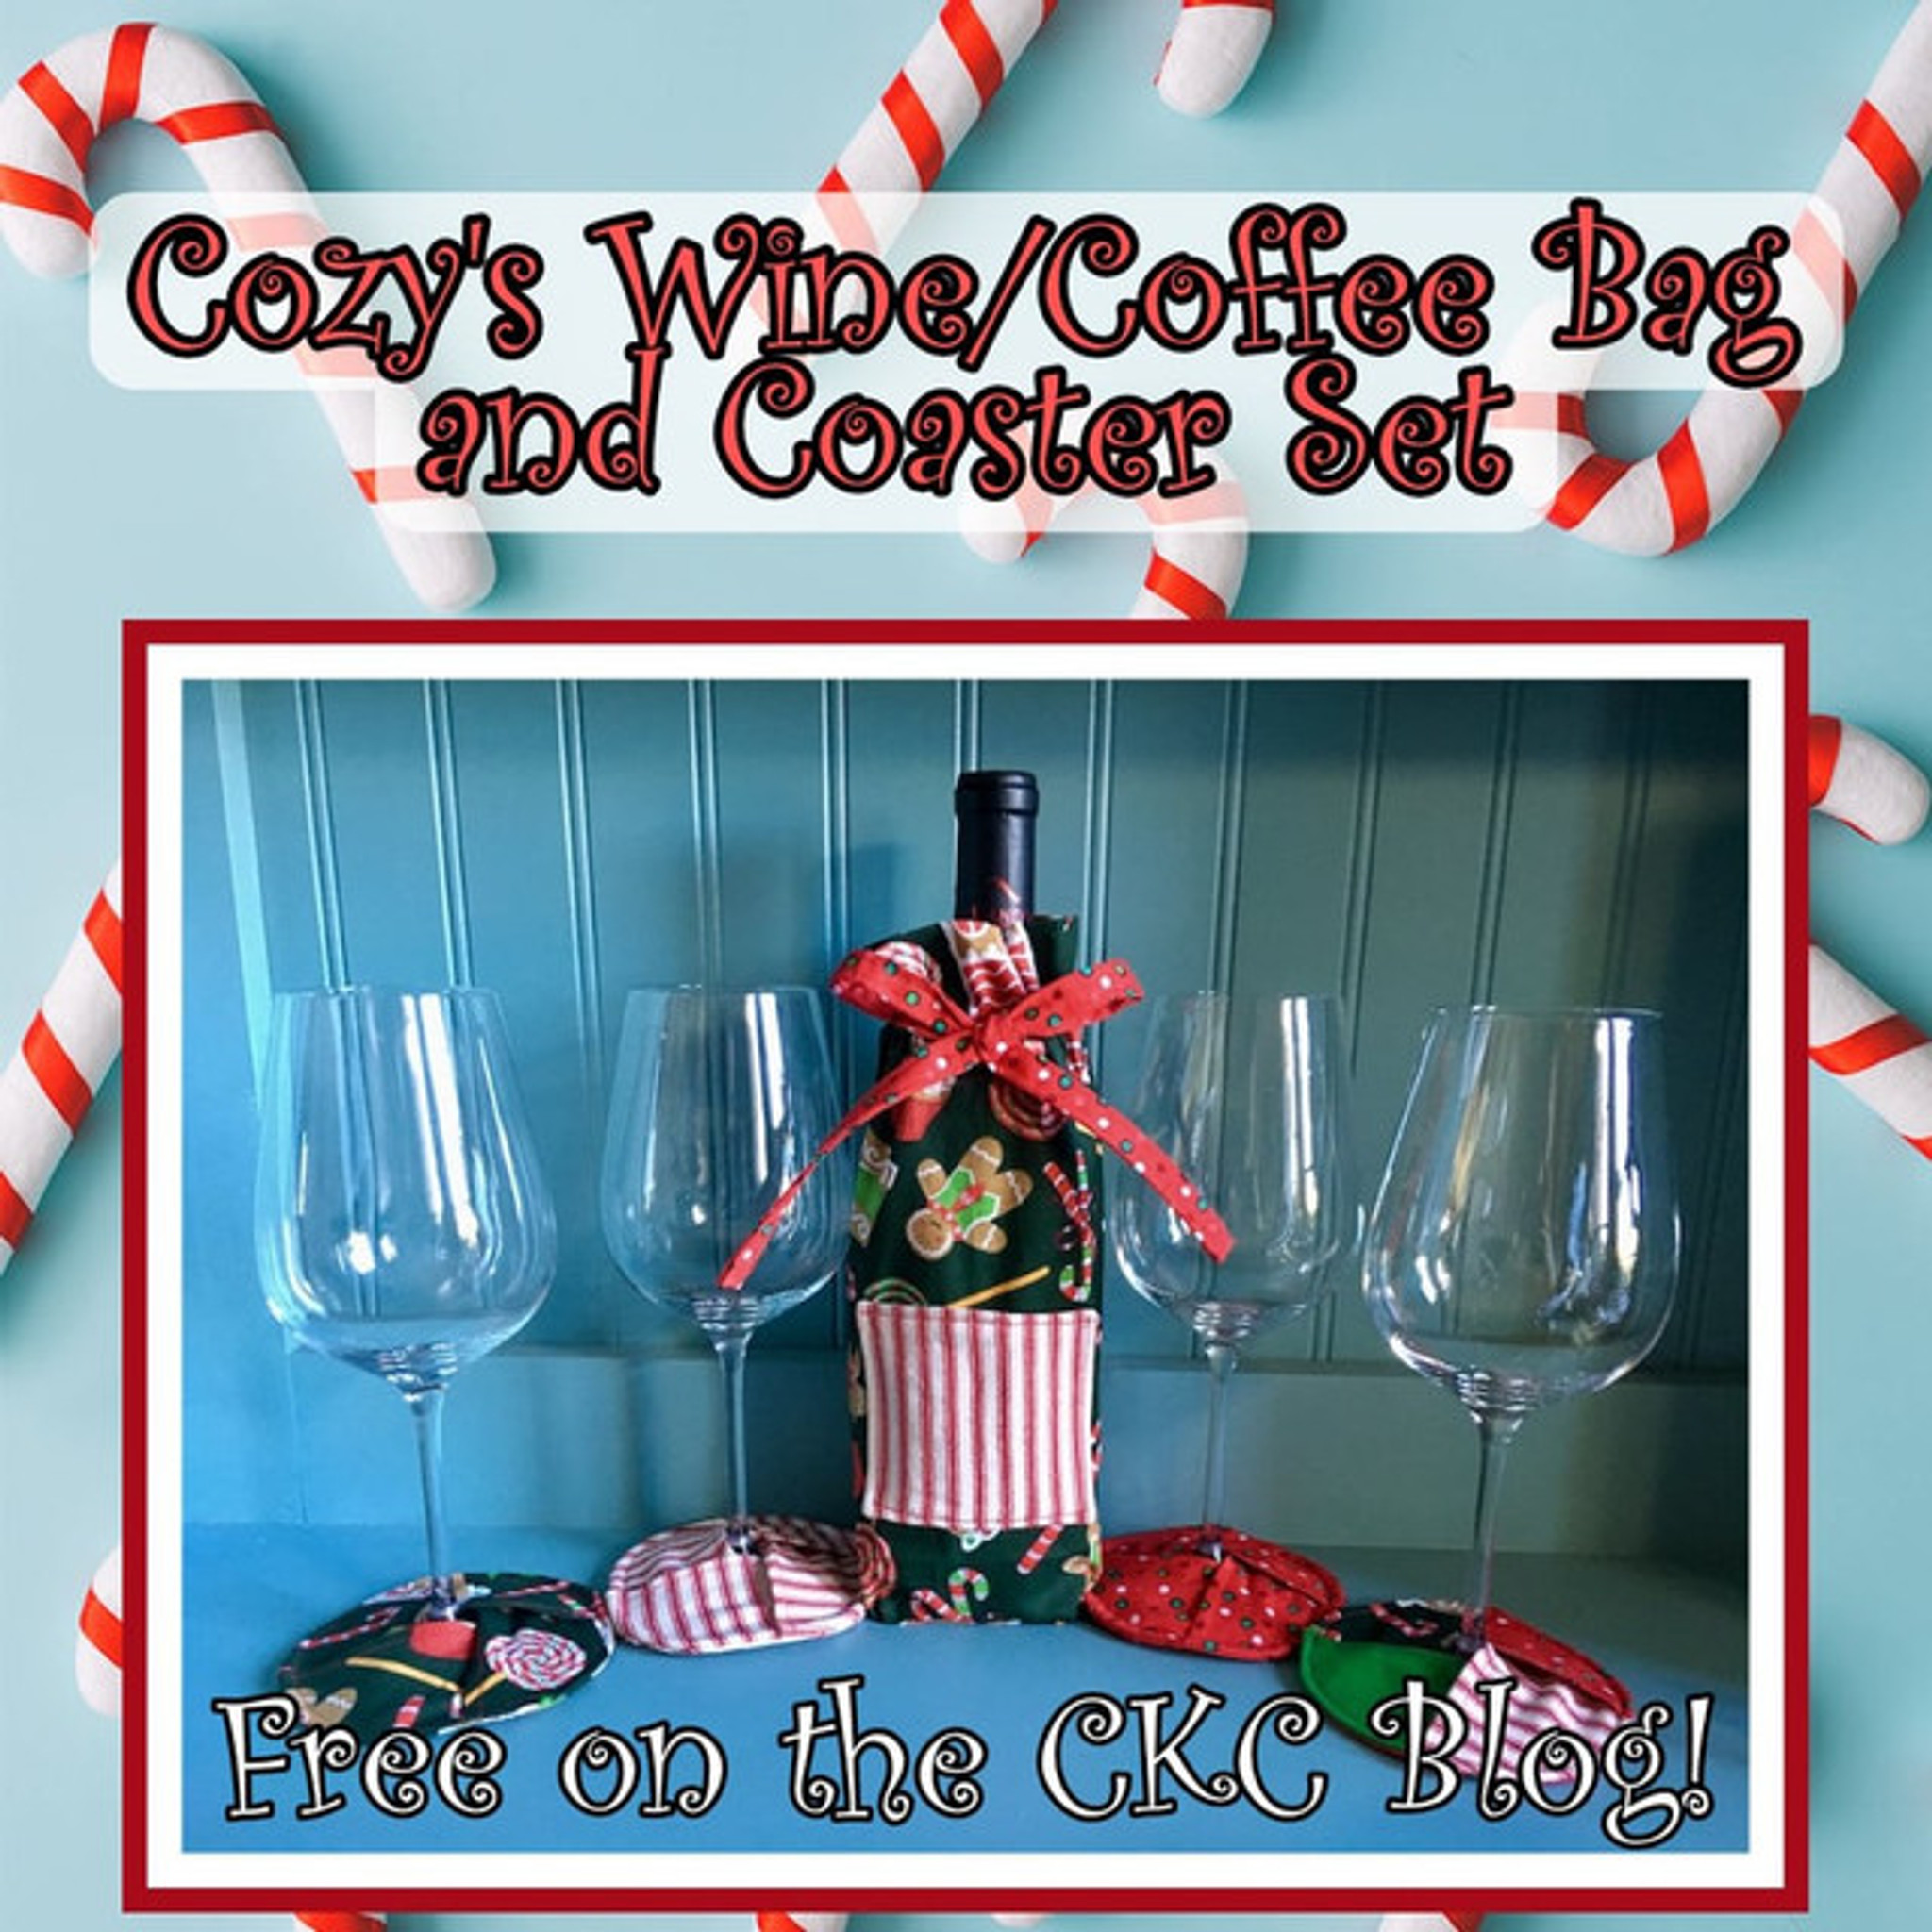 Countdown to the 12 Days of Christmas:  Cozy's Wine/ Coffee Bag and Coaster Set